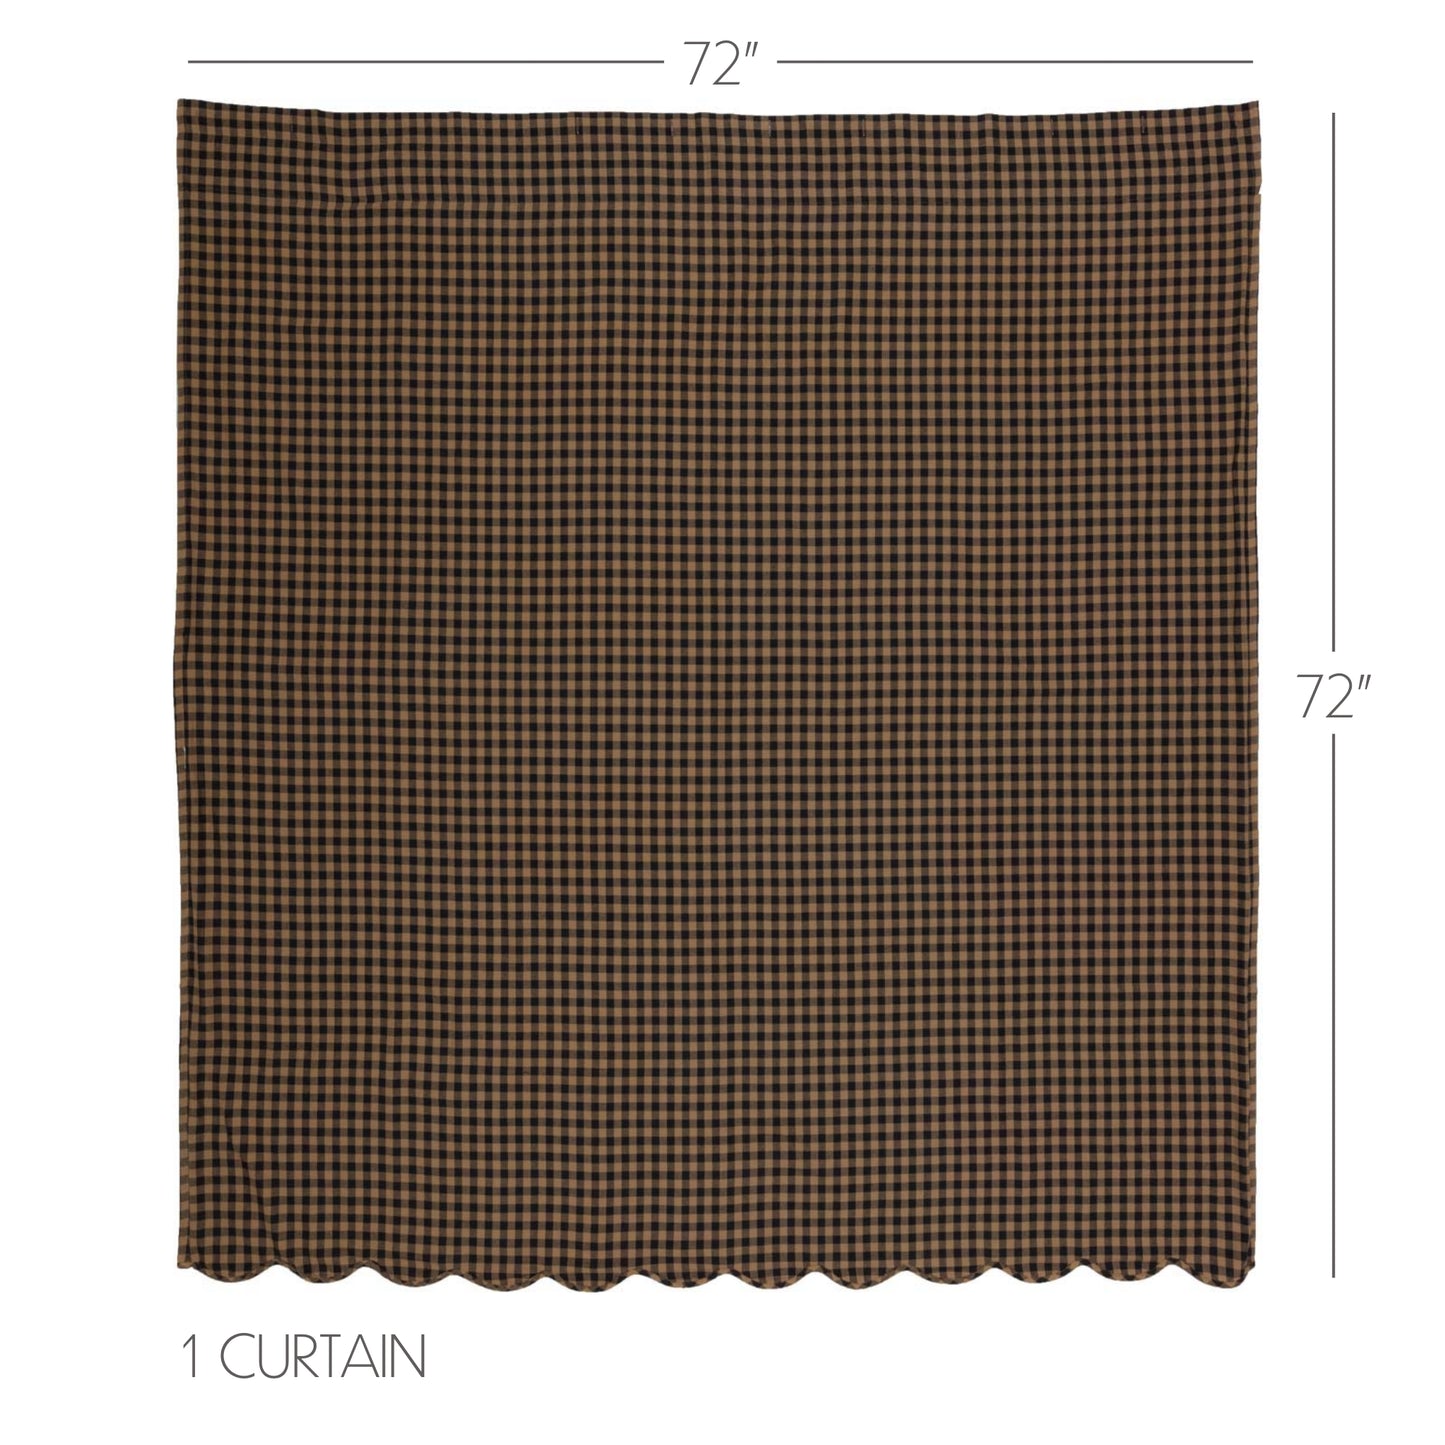 20207-Black-Check-Scalloped-Shower-Curtain-72x72-image-1